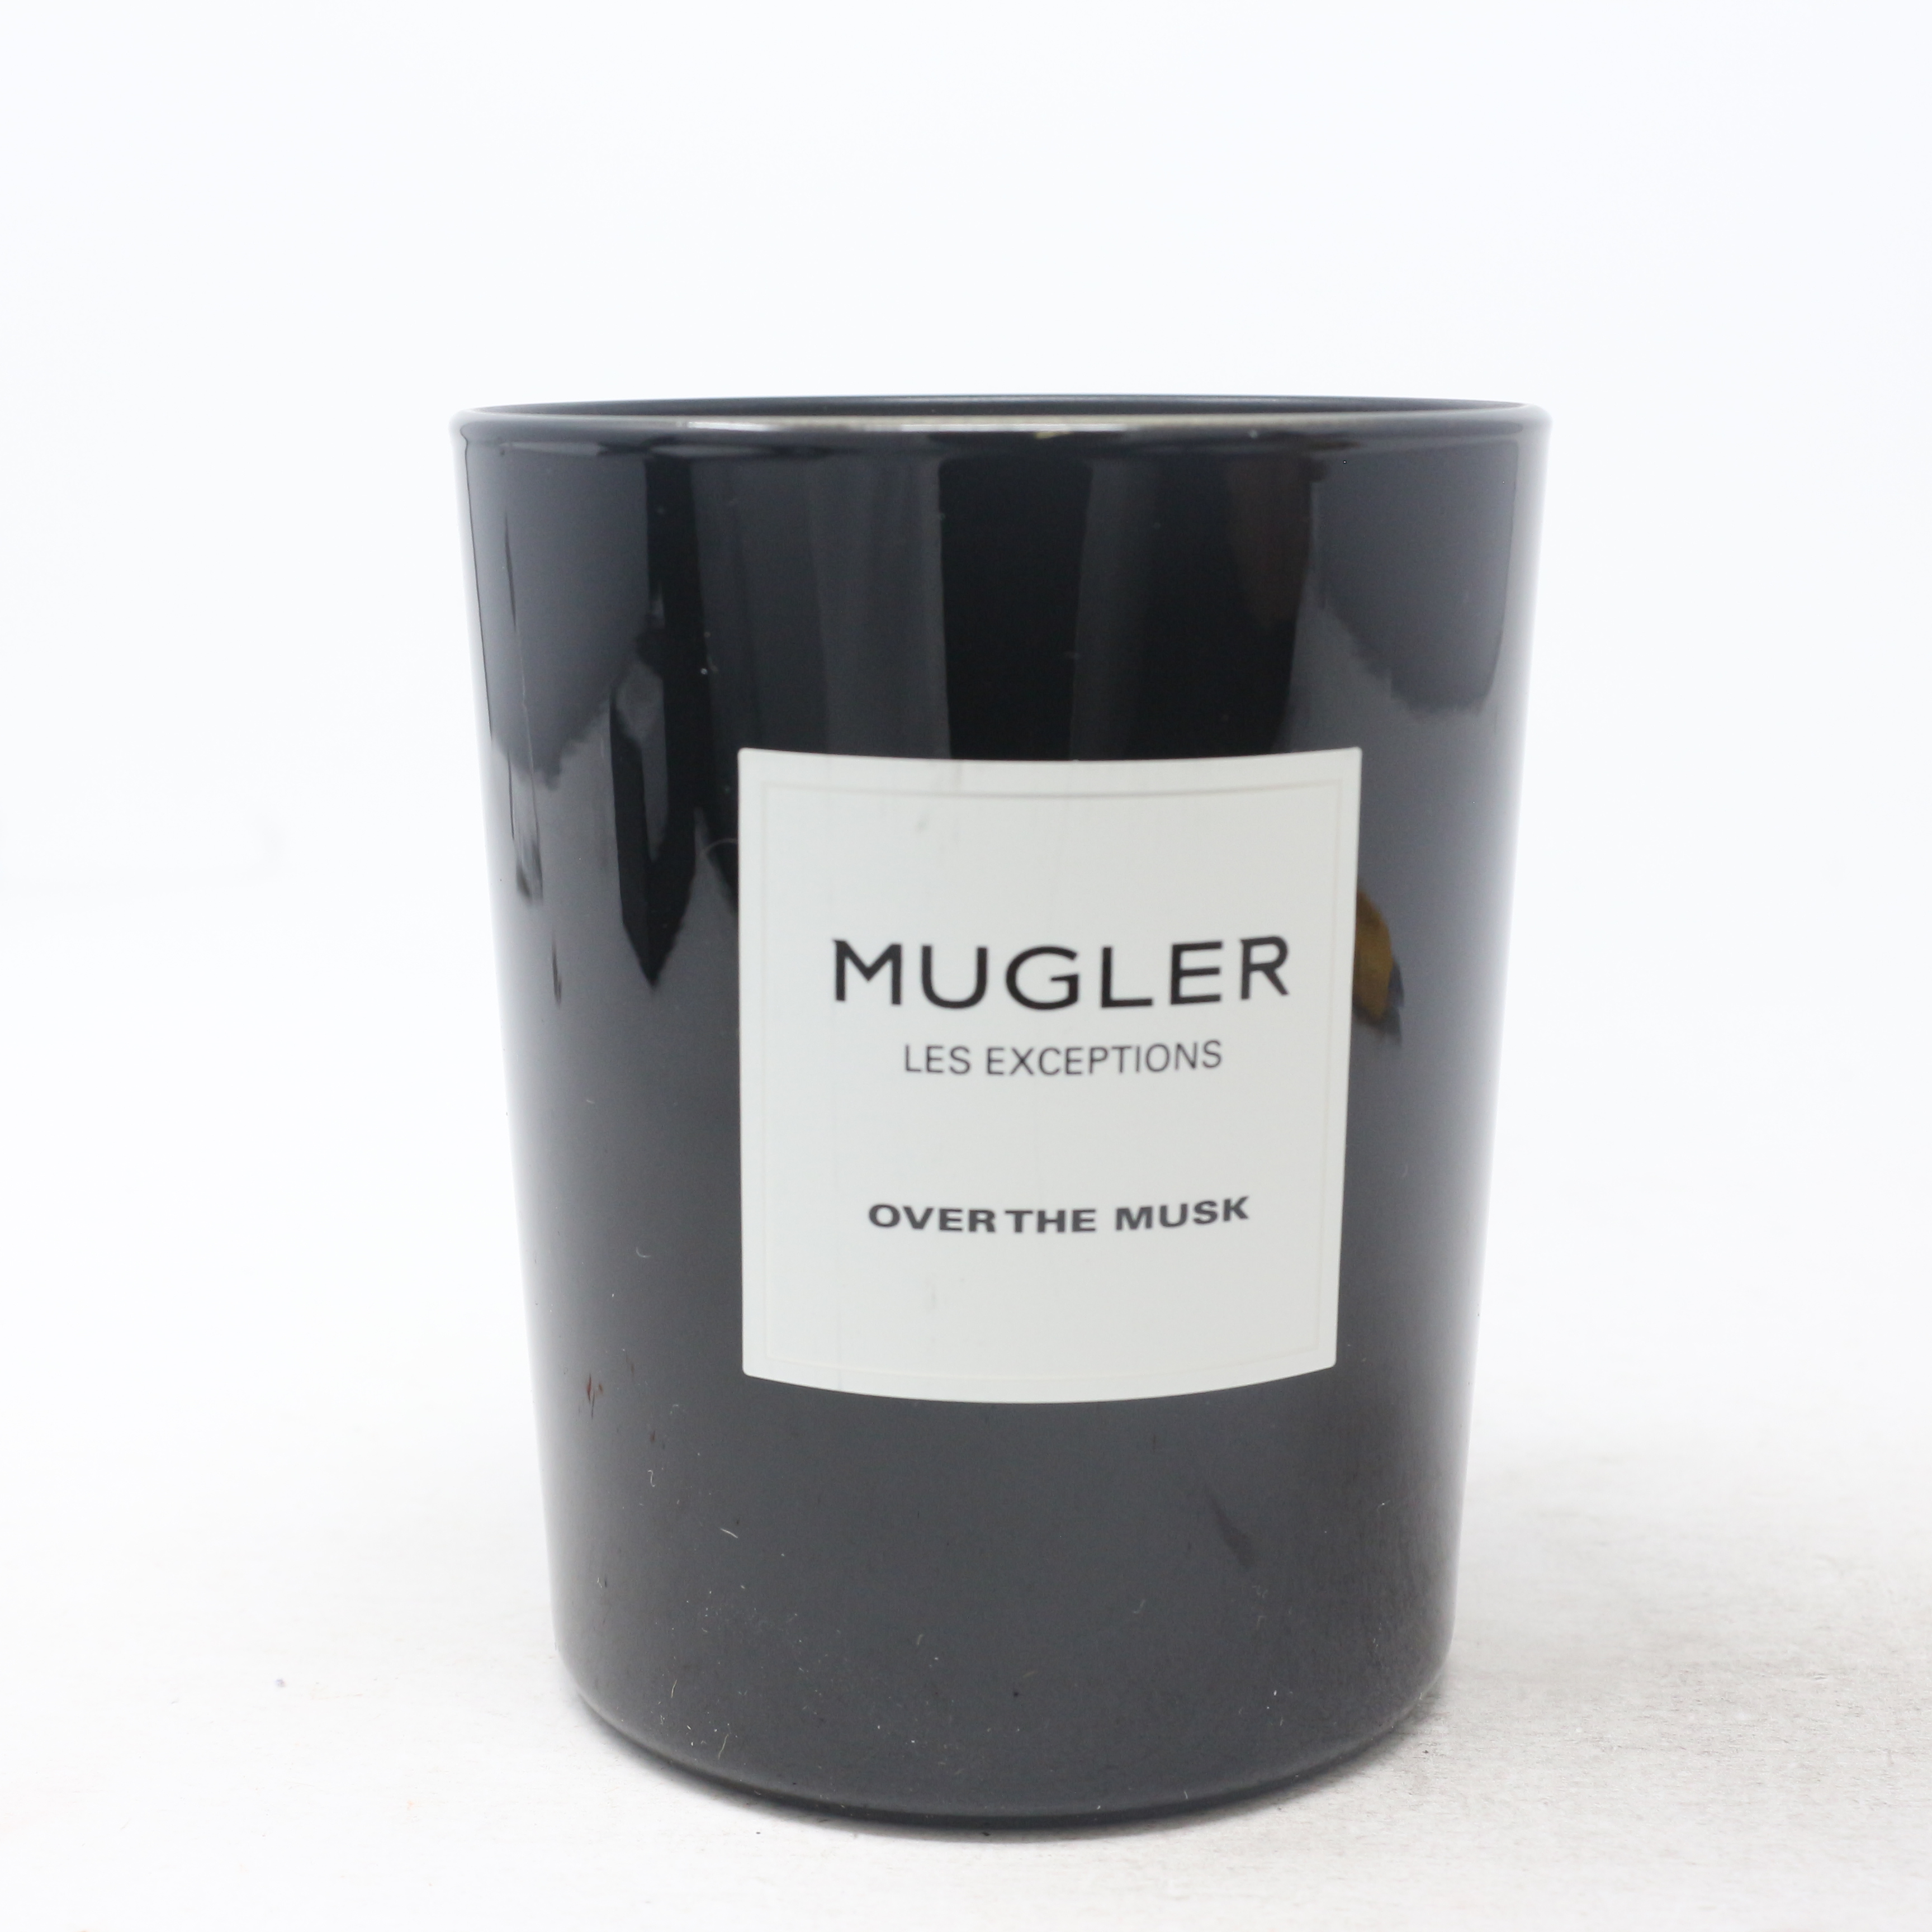 mugler les exceptions over the musk review